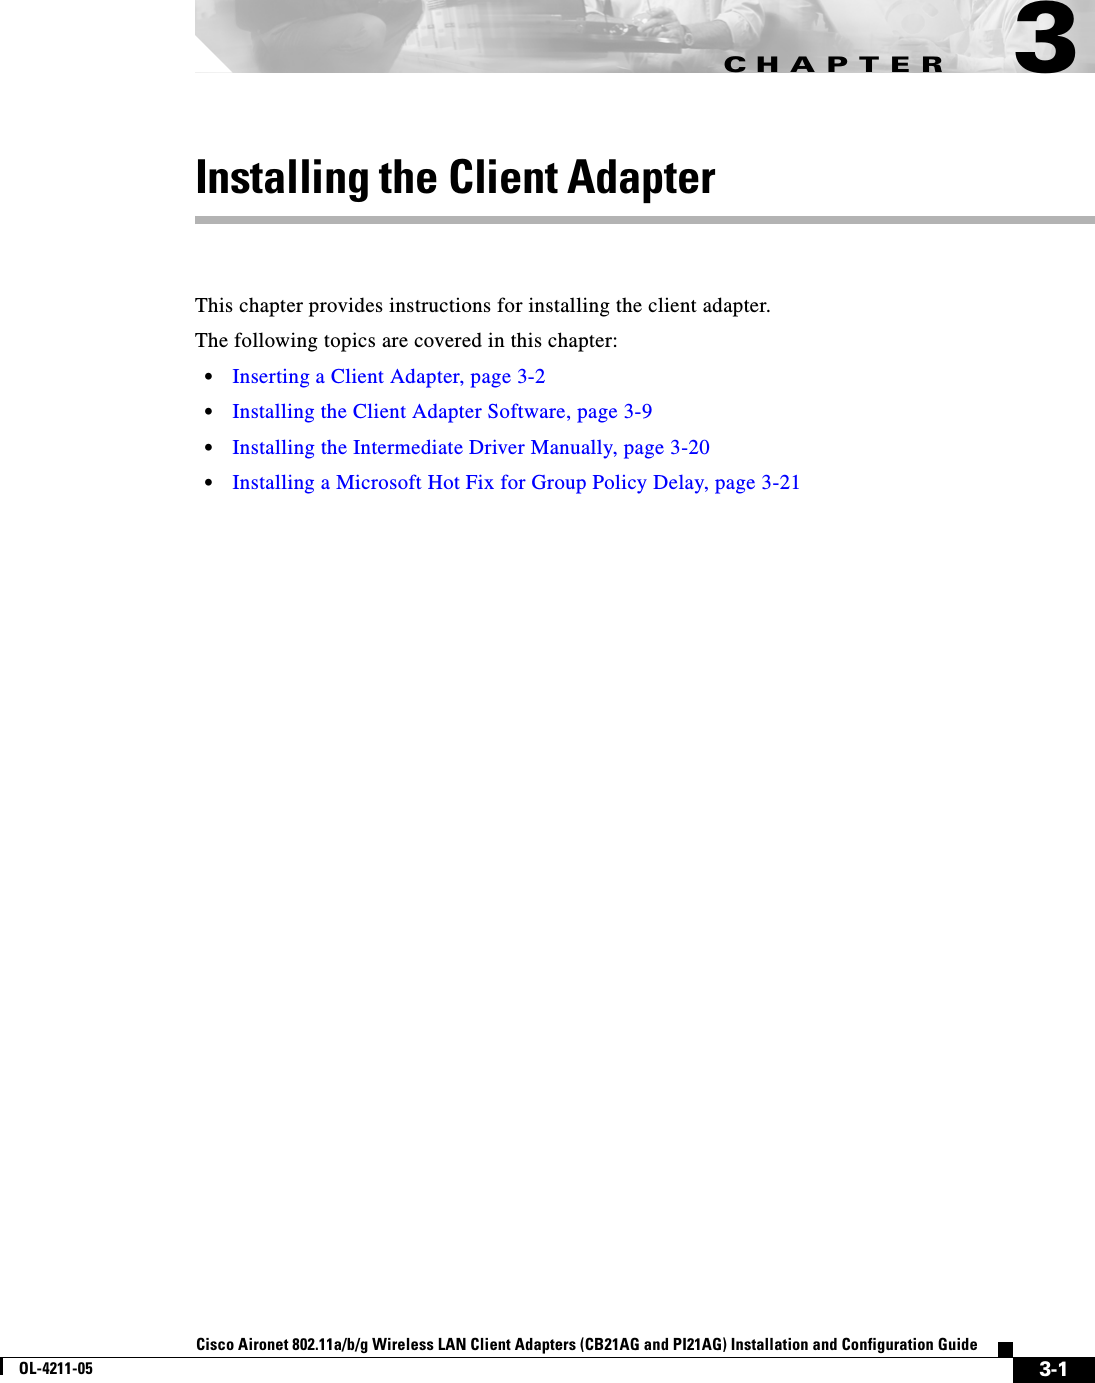 CHAPTER3-1Cisco Aironet 802.11a/b/g Wireless LAN Client Adapters (CB21AG and PI21AG) Installation and Configuration GuideOL-4211-053Installing the Client AdapterThis chapter provides instructions for installing the client adapter.The following topics are covered in this chapter:•Inserting a Client Adapter, page 3-2•Installing the Client Adapter Software, page 3-9•Installing the Intermediate Driver Manually, page 3-20•Installing a Microsoft Hot Fix for Group Policy Delay, page 3-21